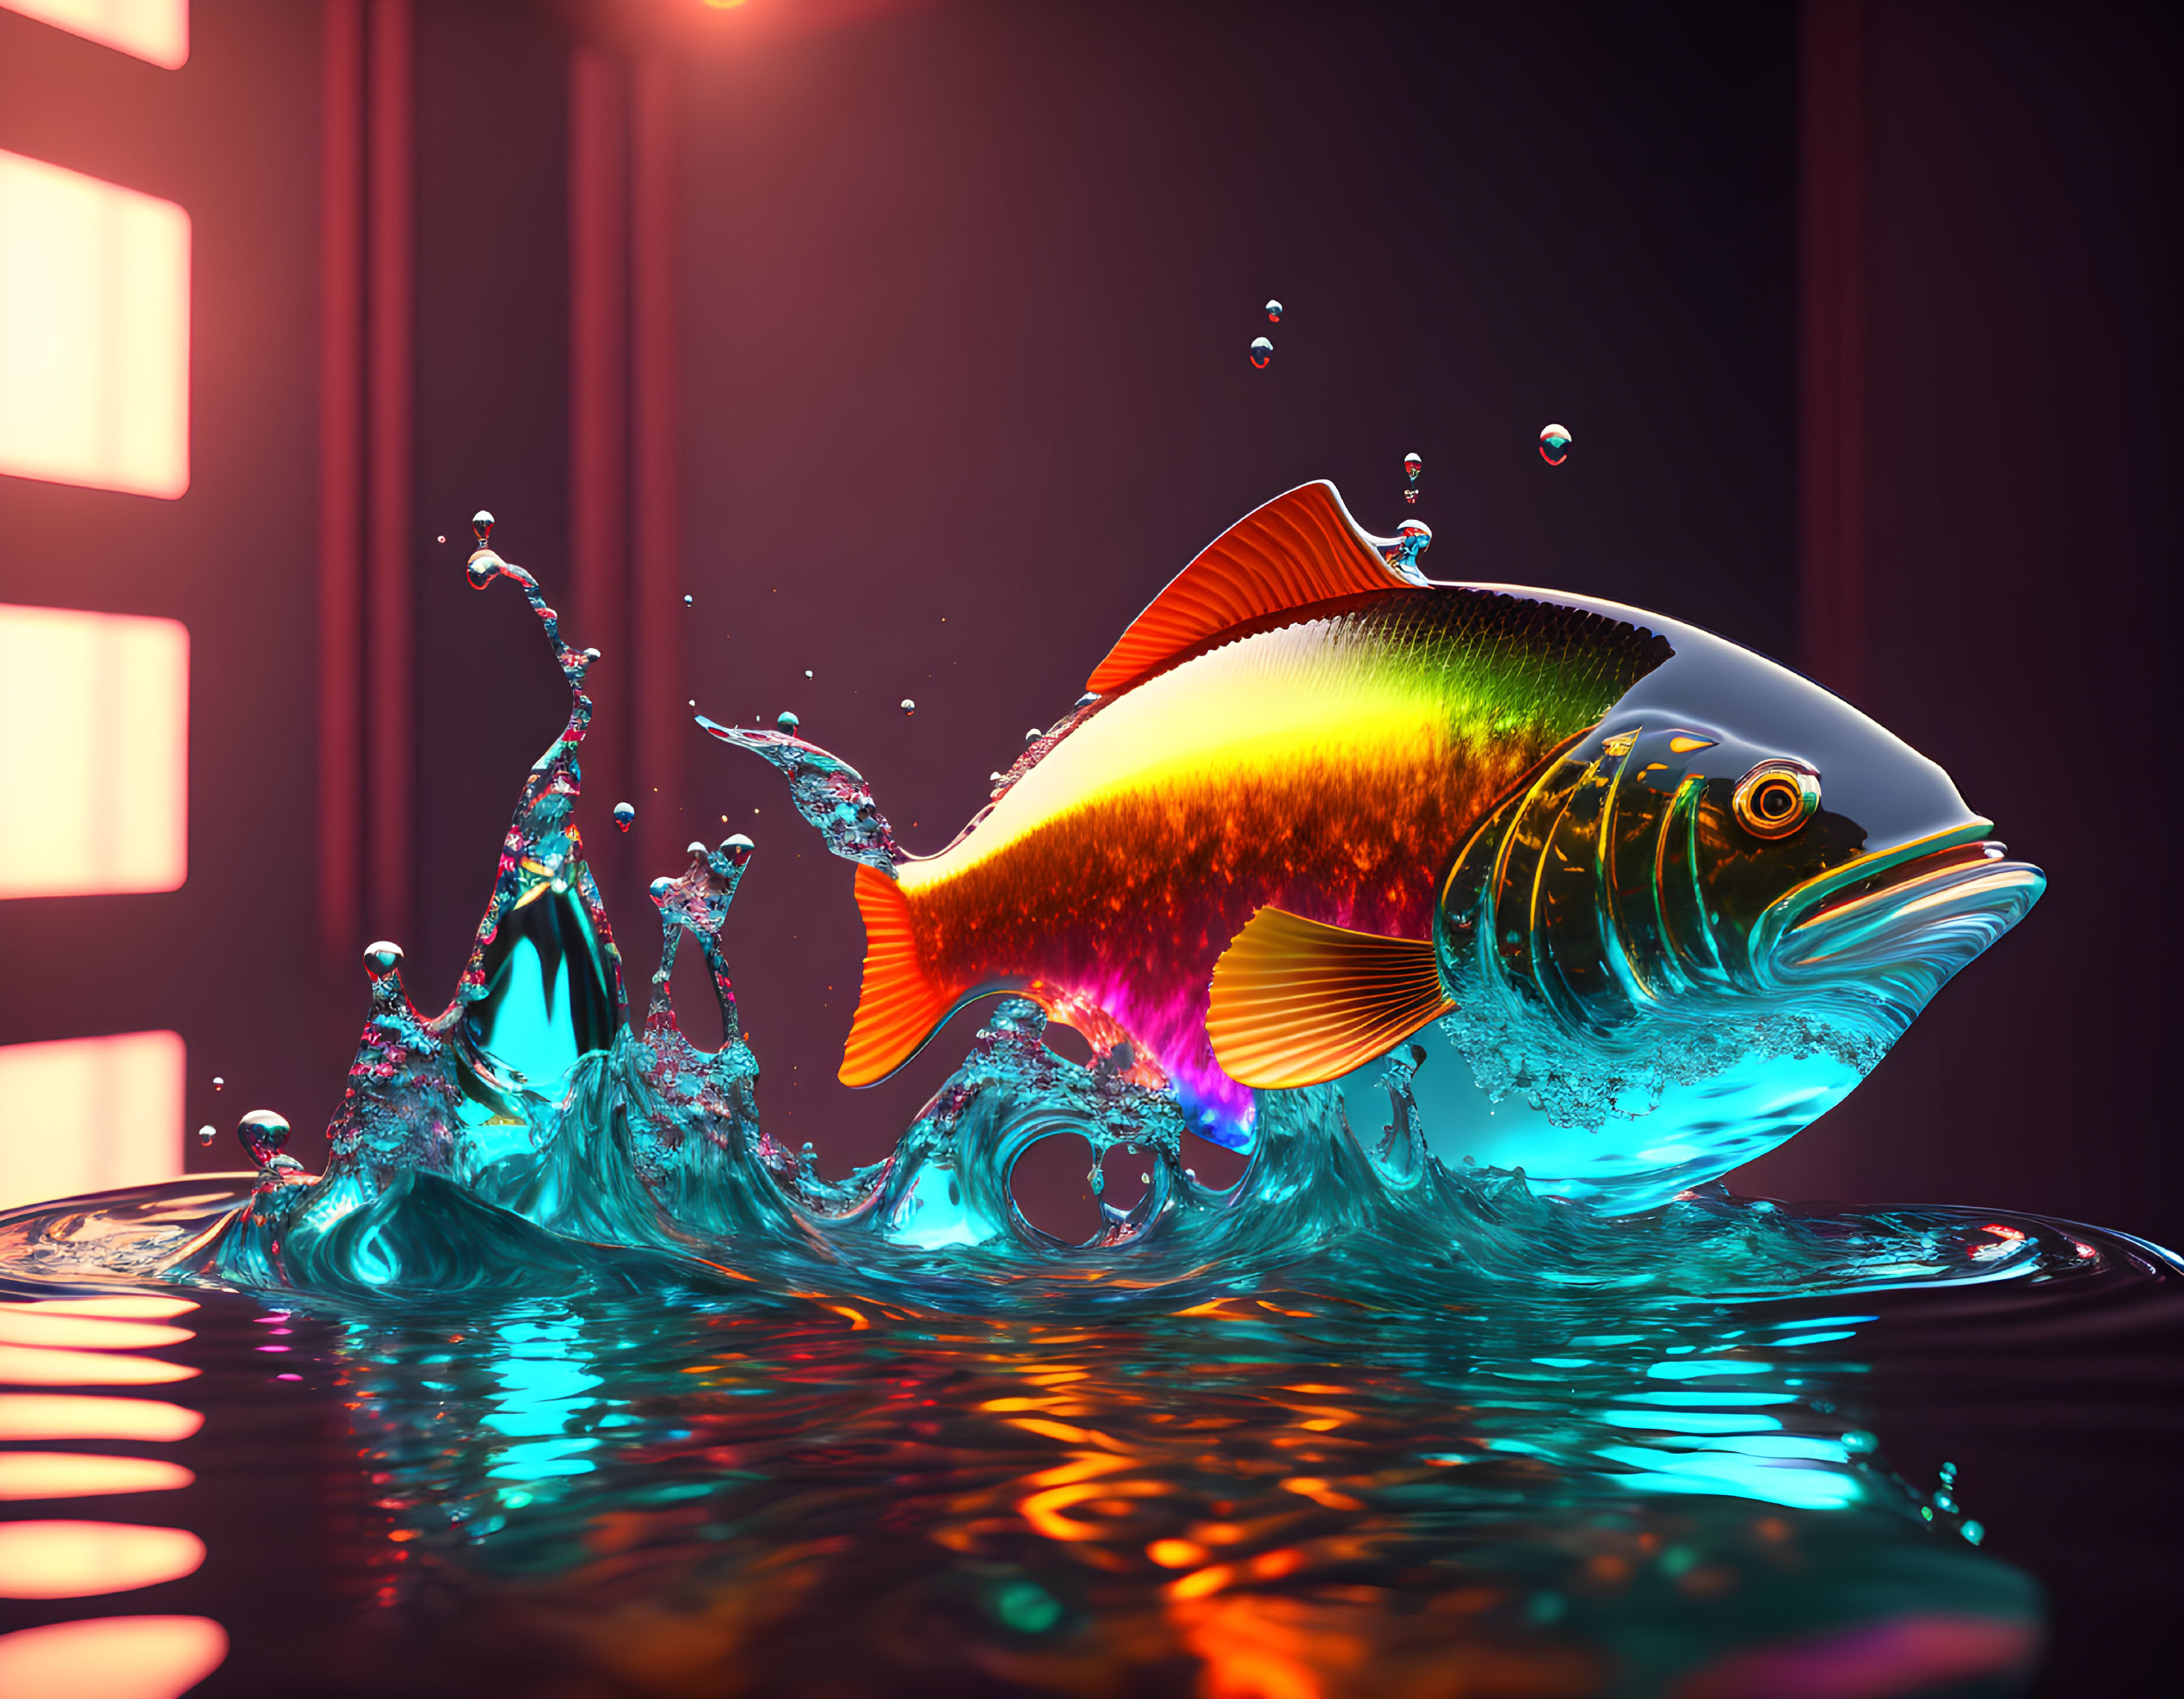 Colorful Fish Leaping Out of Water with Dynamic Splashes